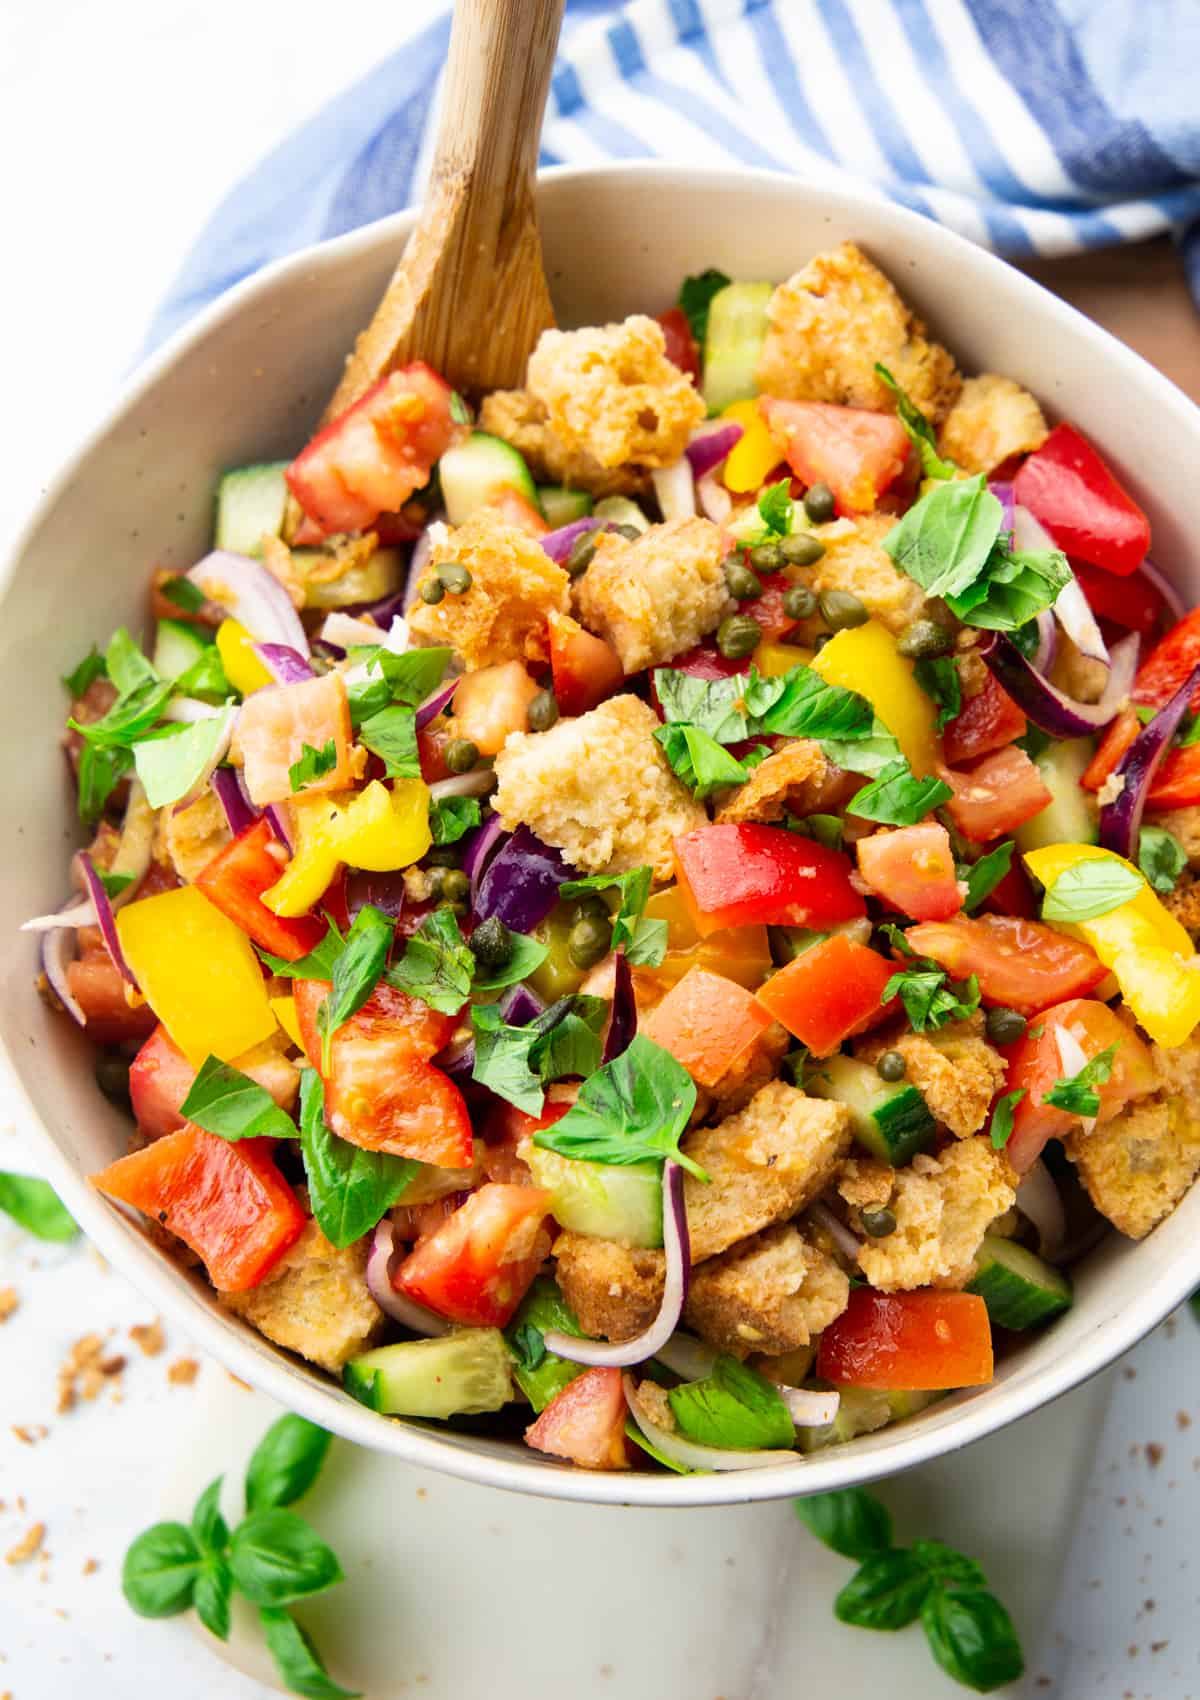 Panzanella in a beige bowl with a wooden spoon on a marble countertop with basil on the side